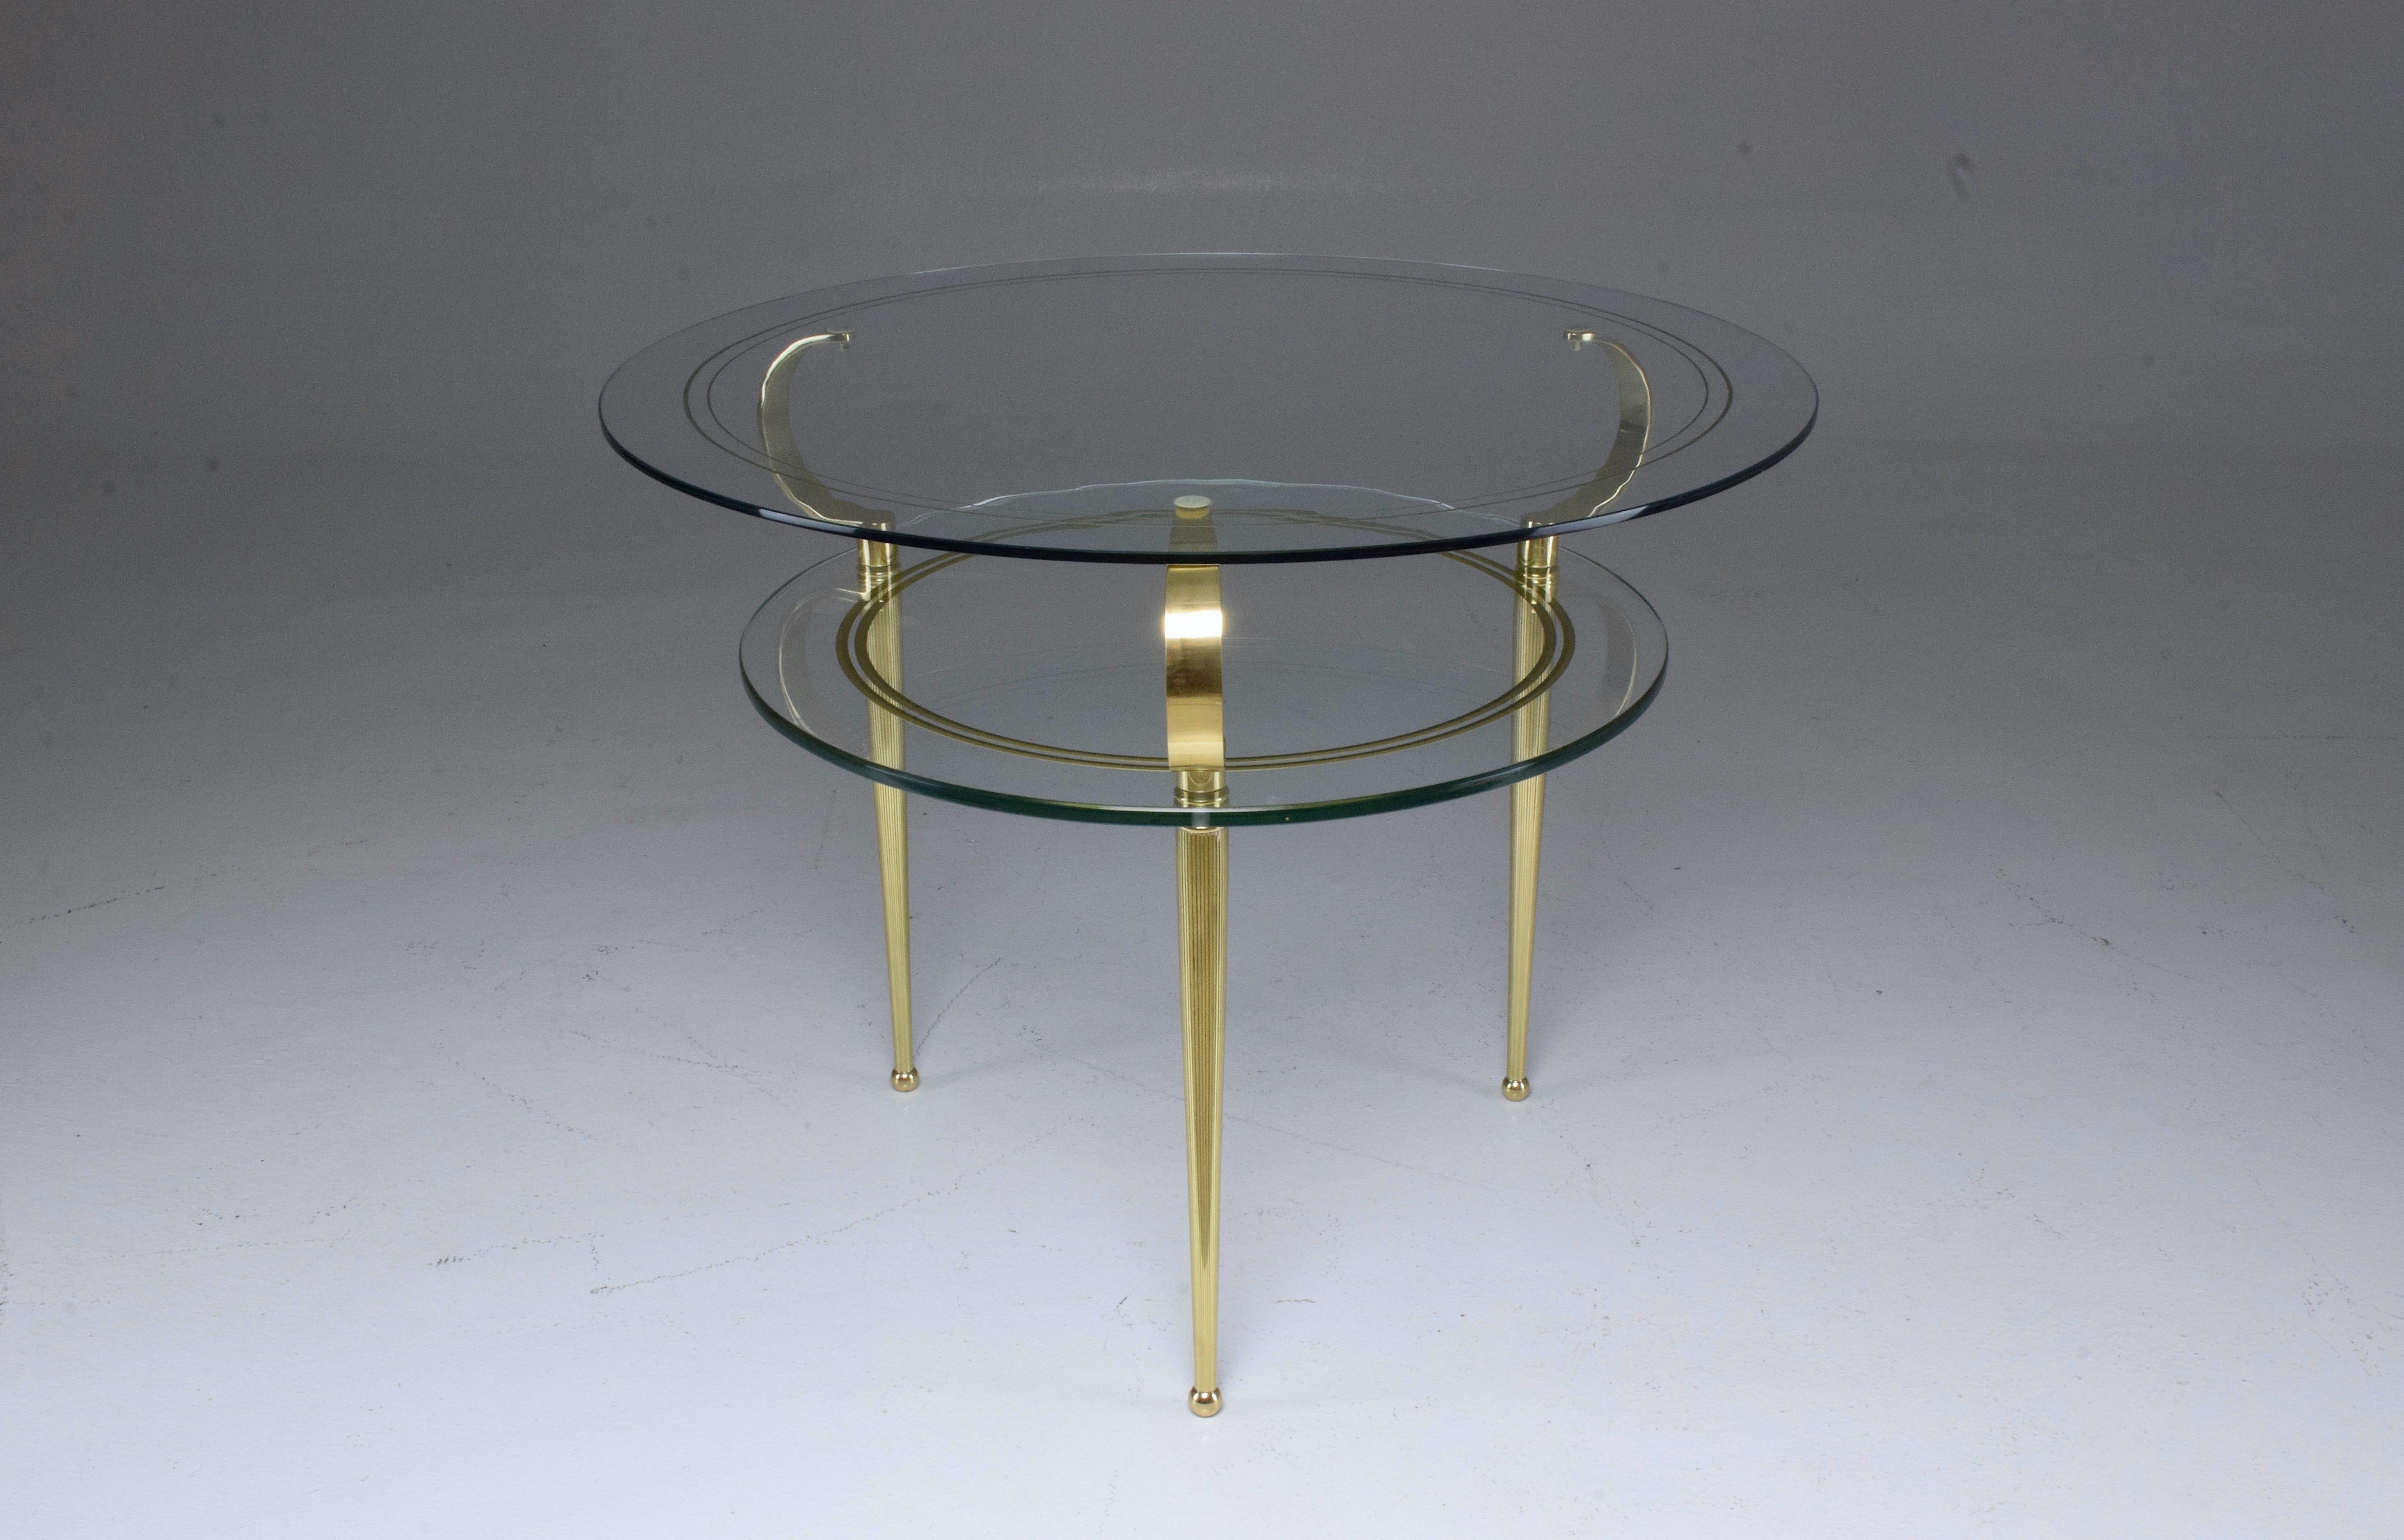 A 20th century vintage circular coffee or side table designed by Italian master Cesare Lacca, circa 1950s, composed of a two-tiered glass tabletop with gold leaf decorative engraved trims. The structure is made out of an astonishing curved gold